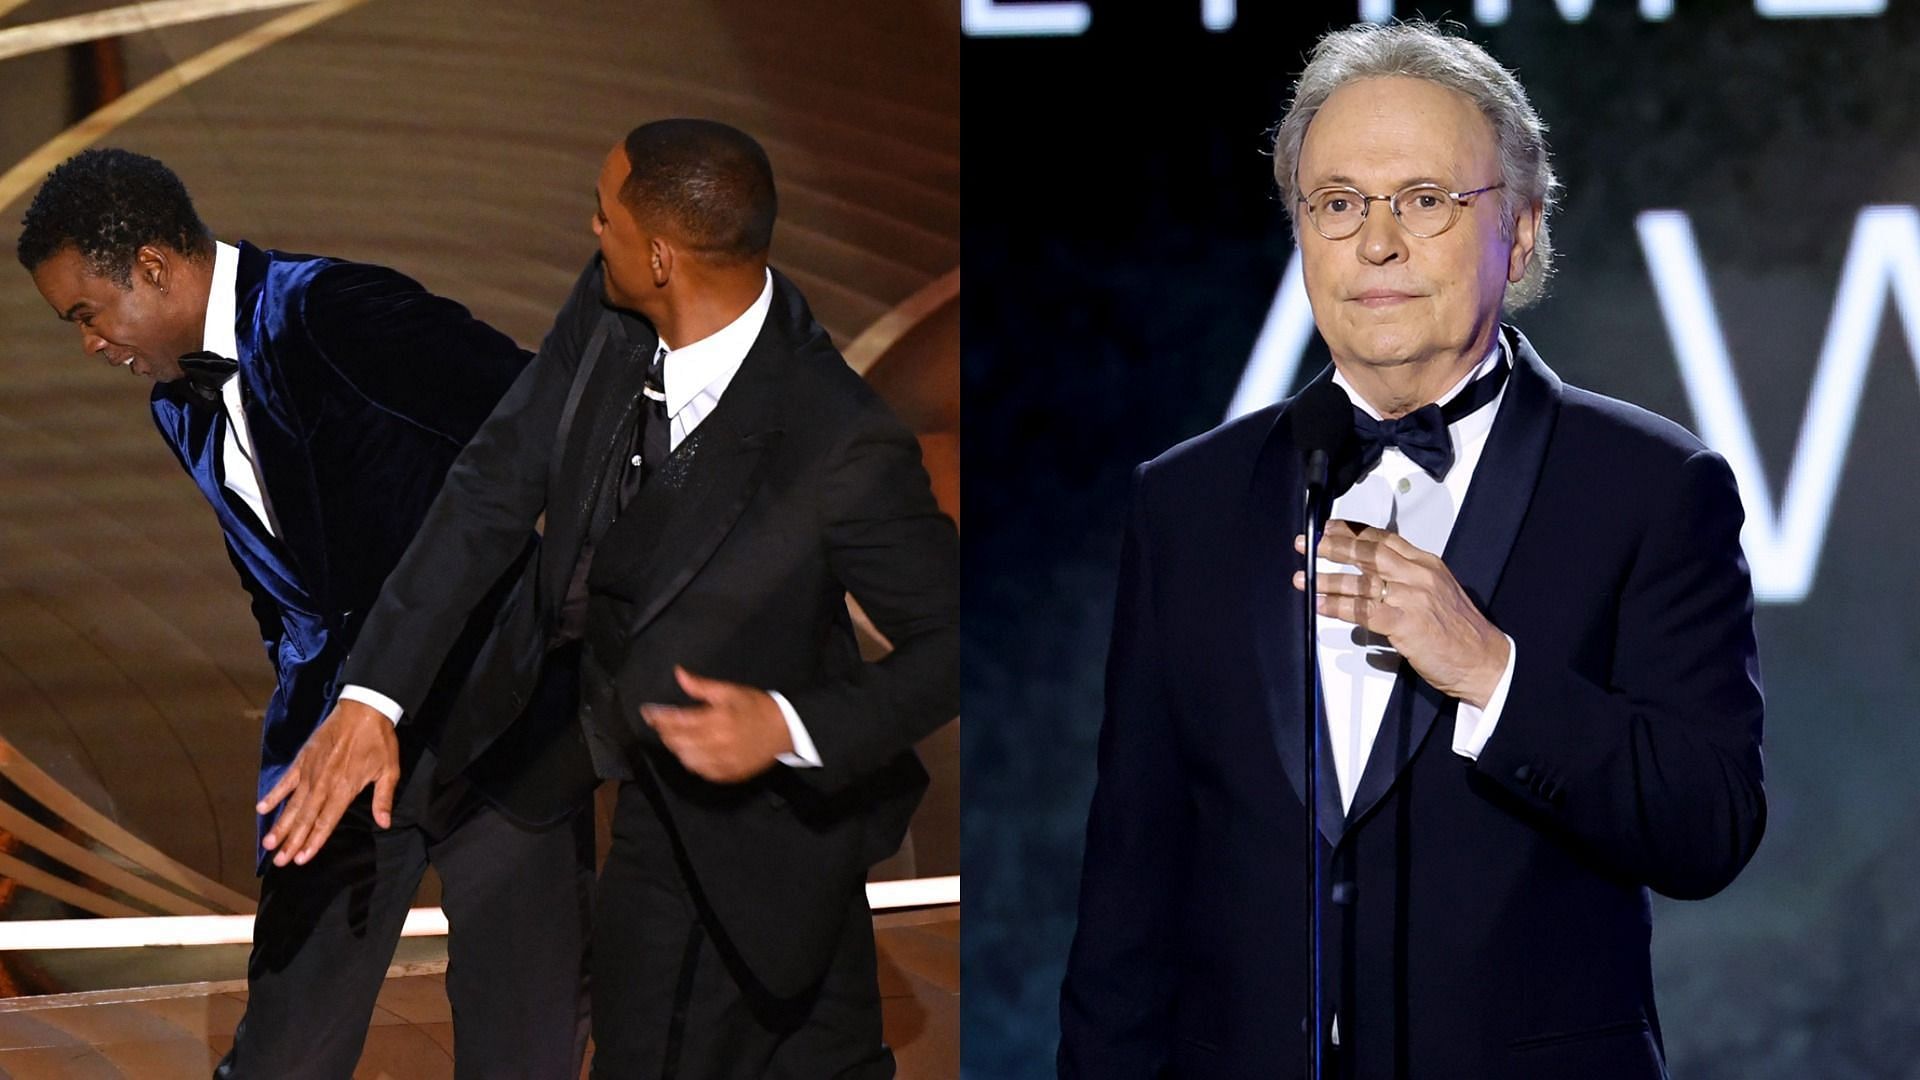 Billy Crystal thought Chris Rock&#039;s joke about Jada Pinkett Smith&#039;s shaved head was &quot;misplaced.&quot; (Image via Getty Images/Amy Sussman/Robyn Beck)